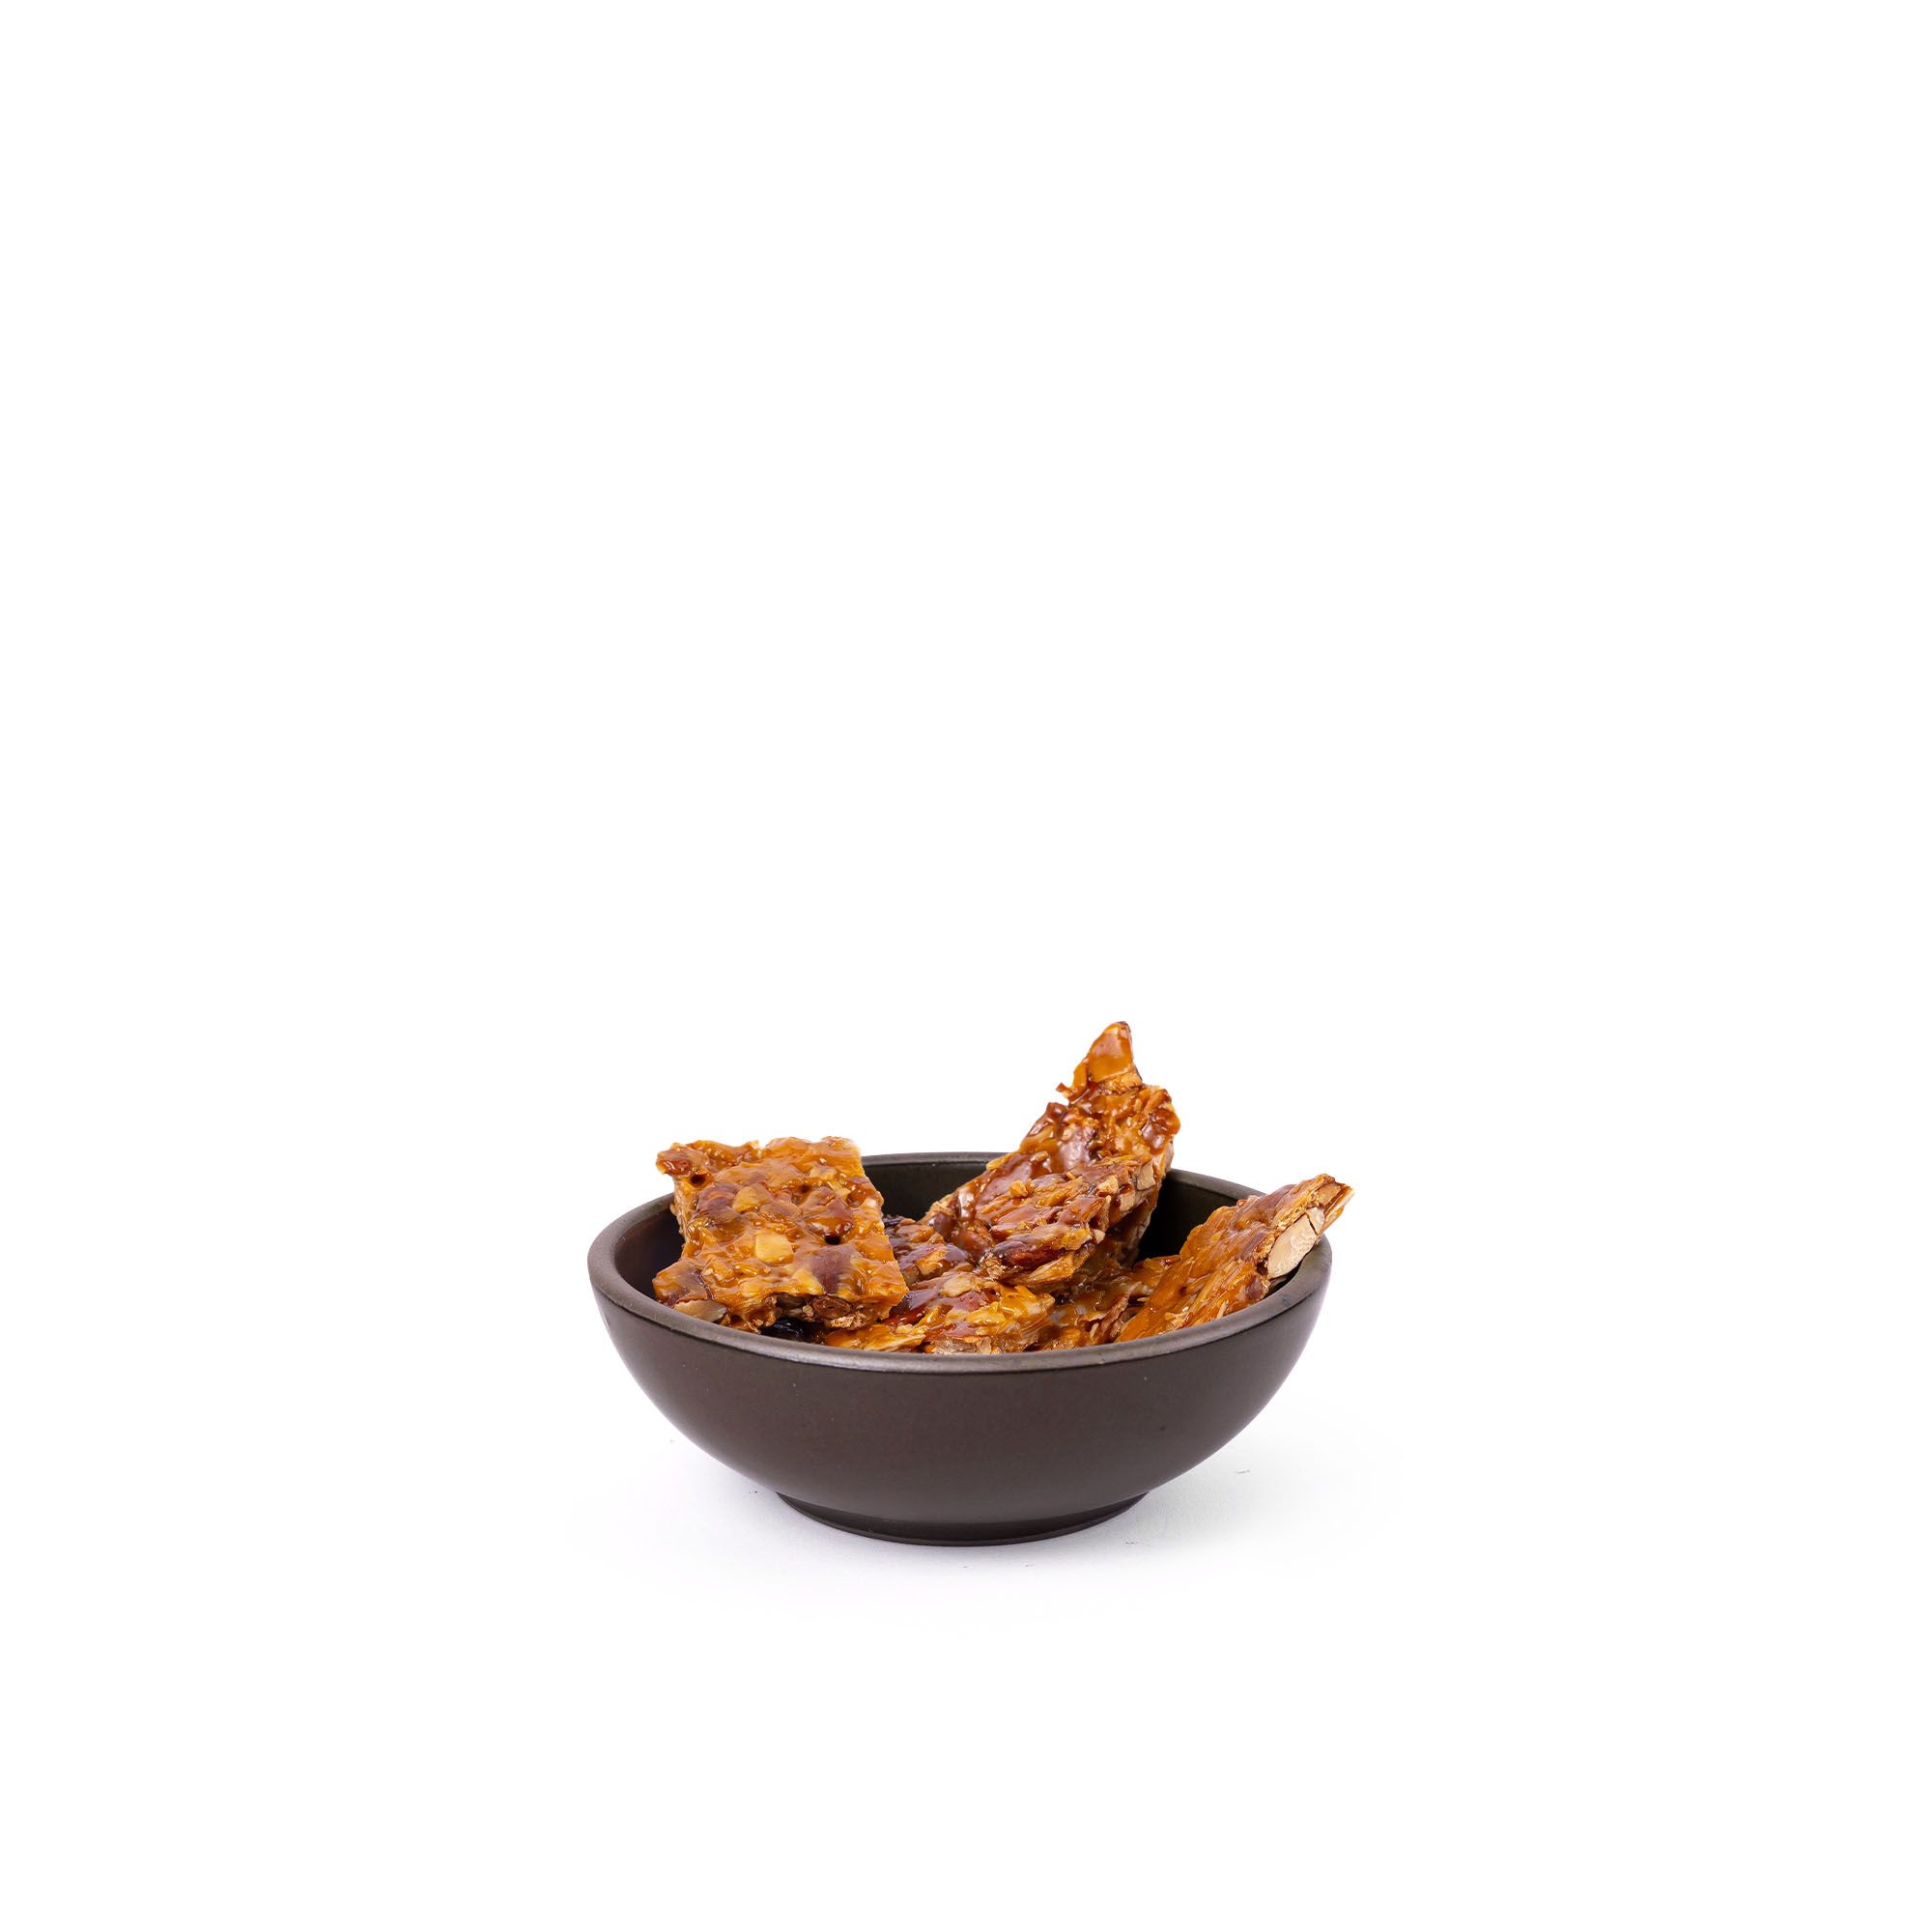 Peanut brittle in a small shallow ceramic bowl in a dark cool brown color featuring iron speckles and an unglazed rim